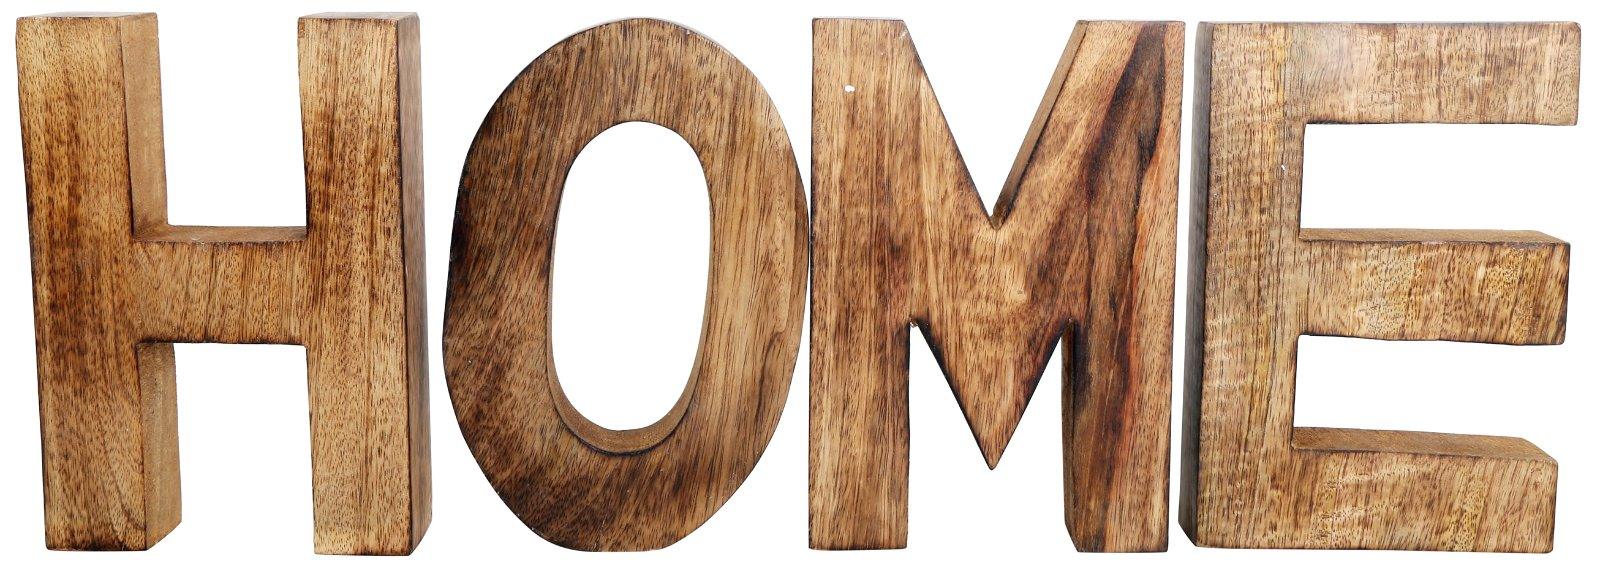 View HOME Wooden Letters Sign information